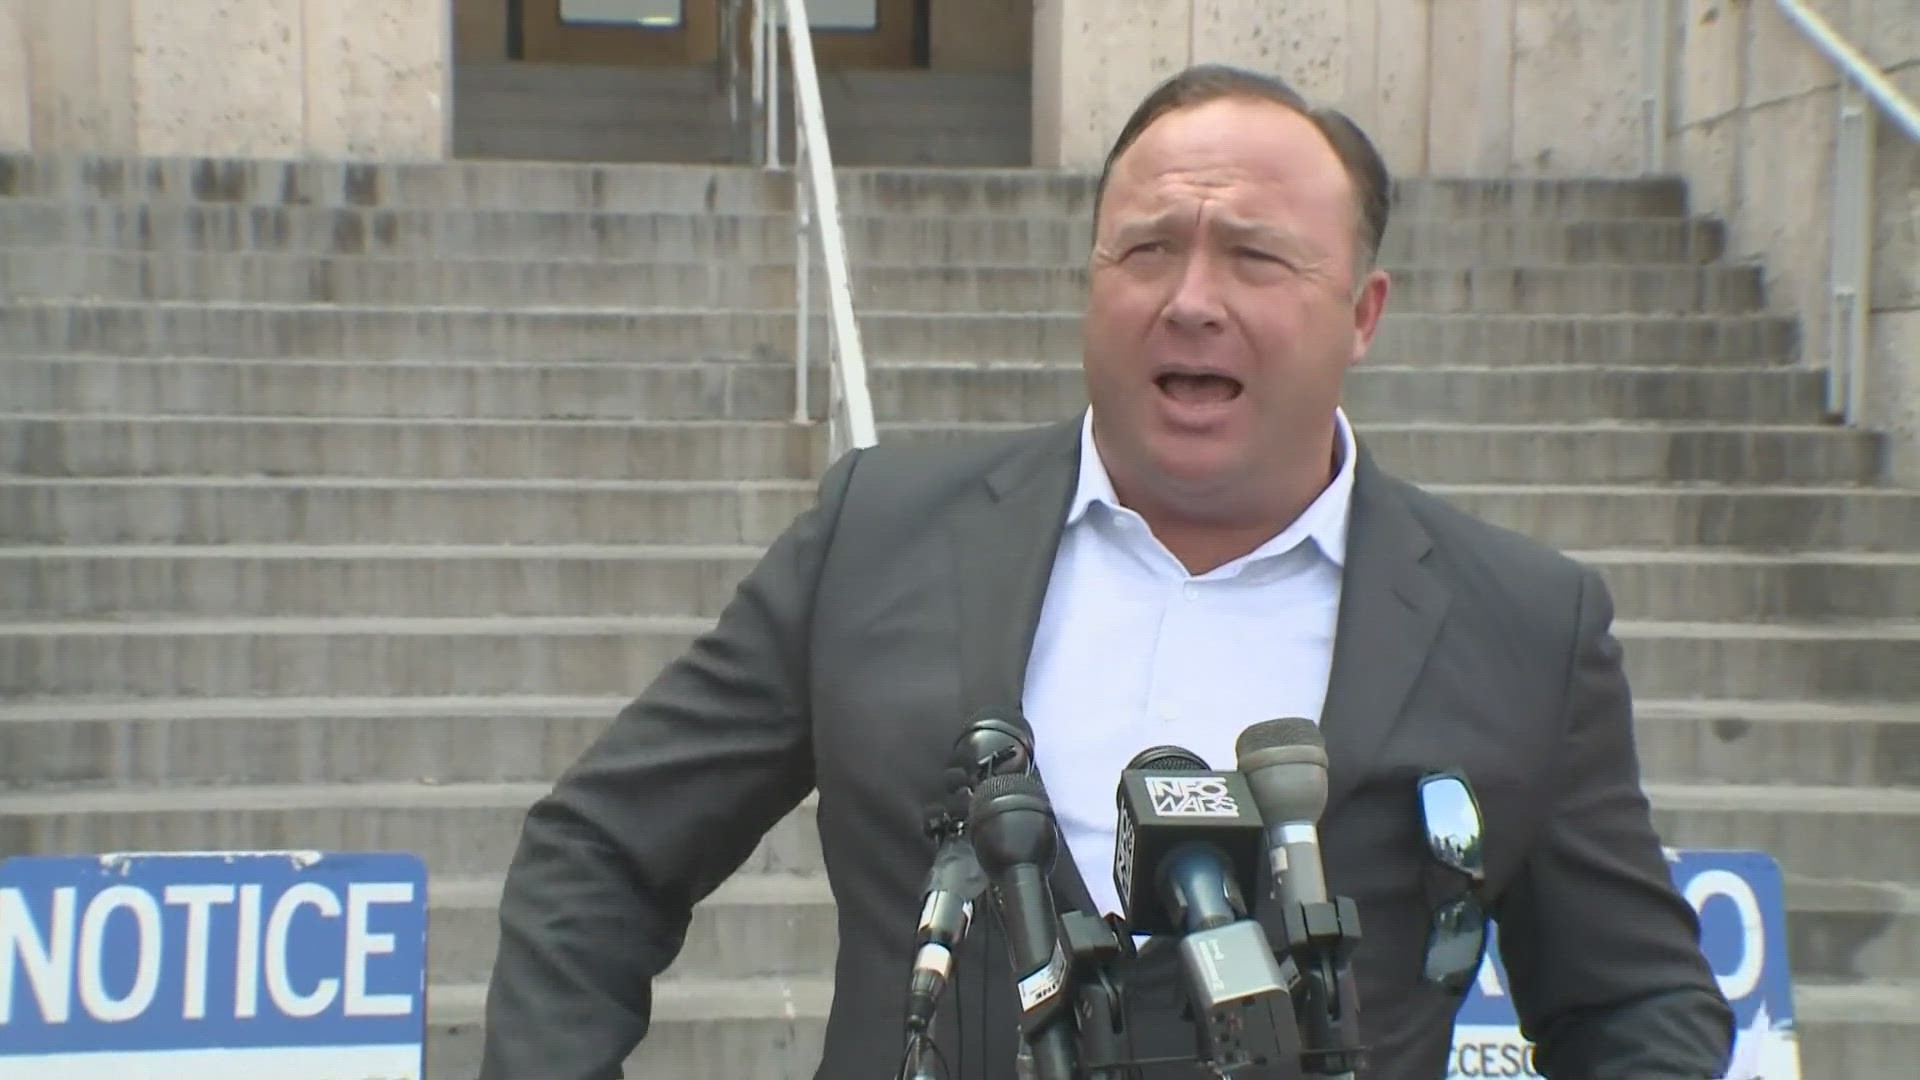 Jones was fined for missing a deposition in the lawsuit by Sandy Hook families.